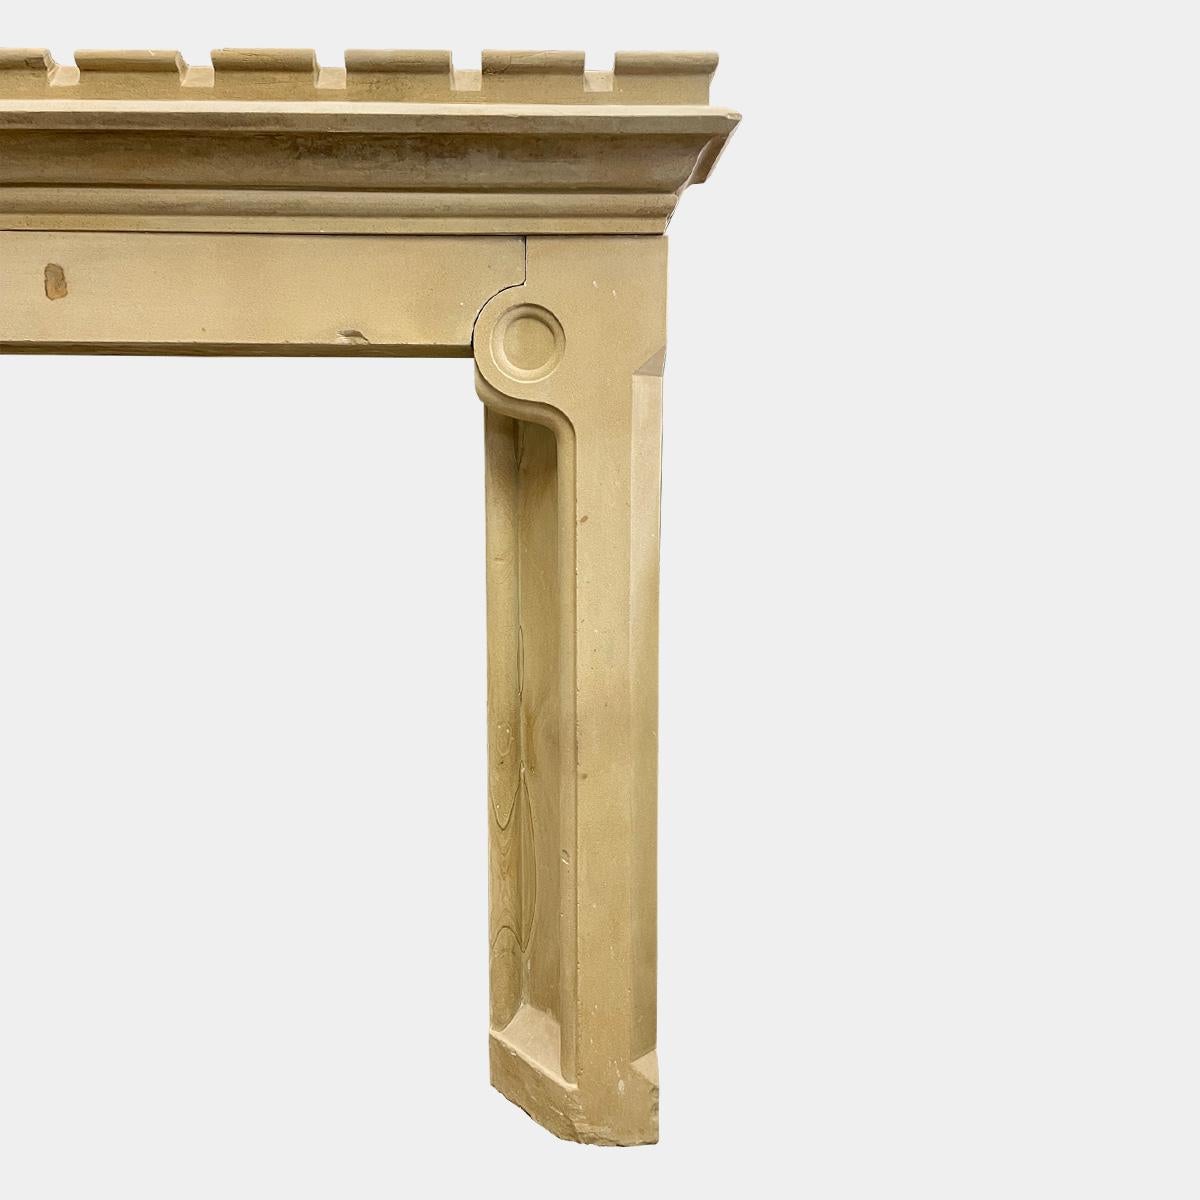 An early to mid 19th century Gothic style English limestone fireplace. Unusual in design, very well proportioned and a substantial piece. The castellated shelf which steps down to sit on a plain frieze with carved ends to meet the roundels carved at